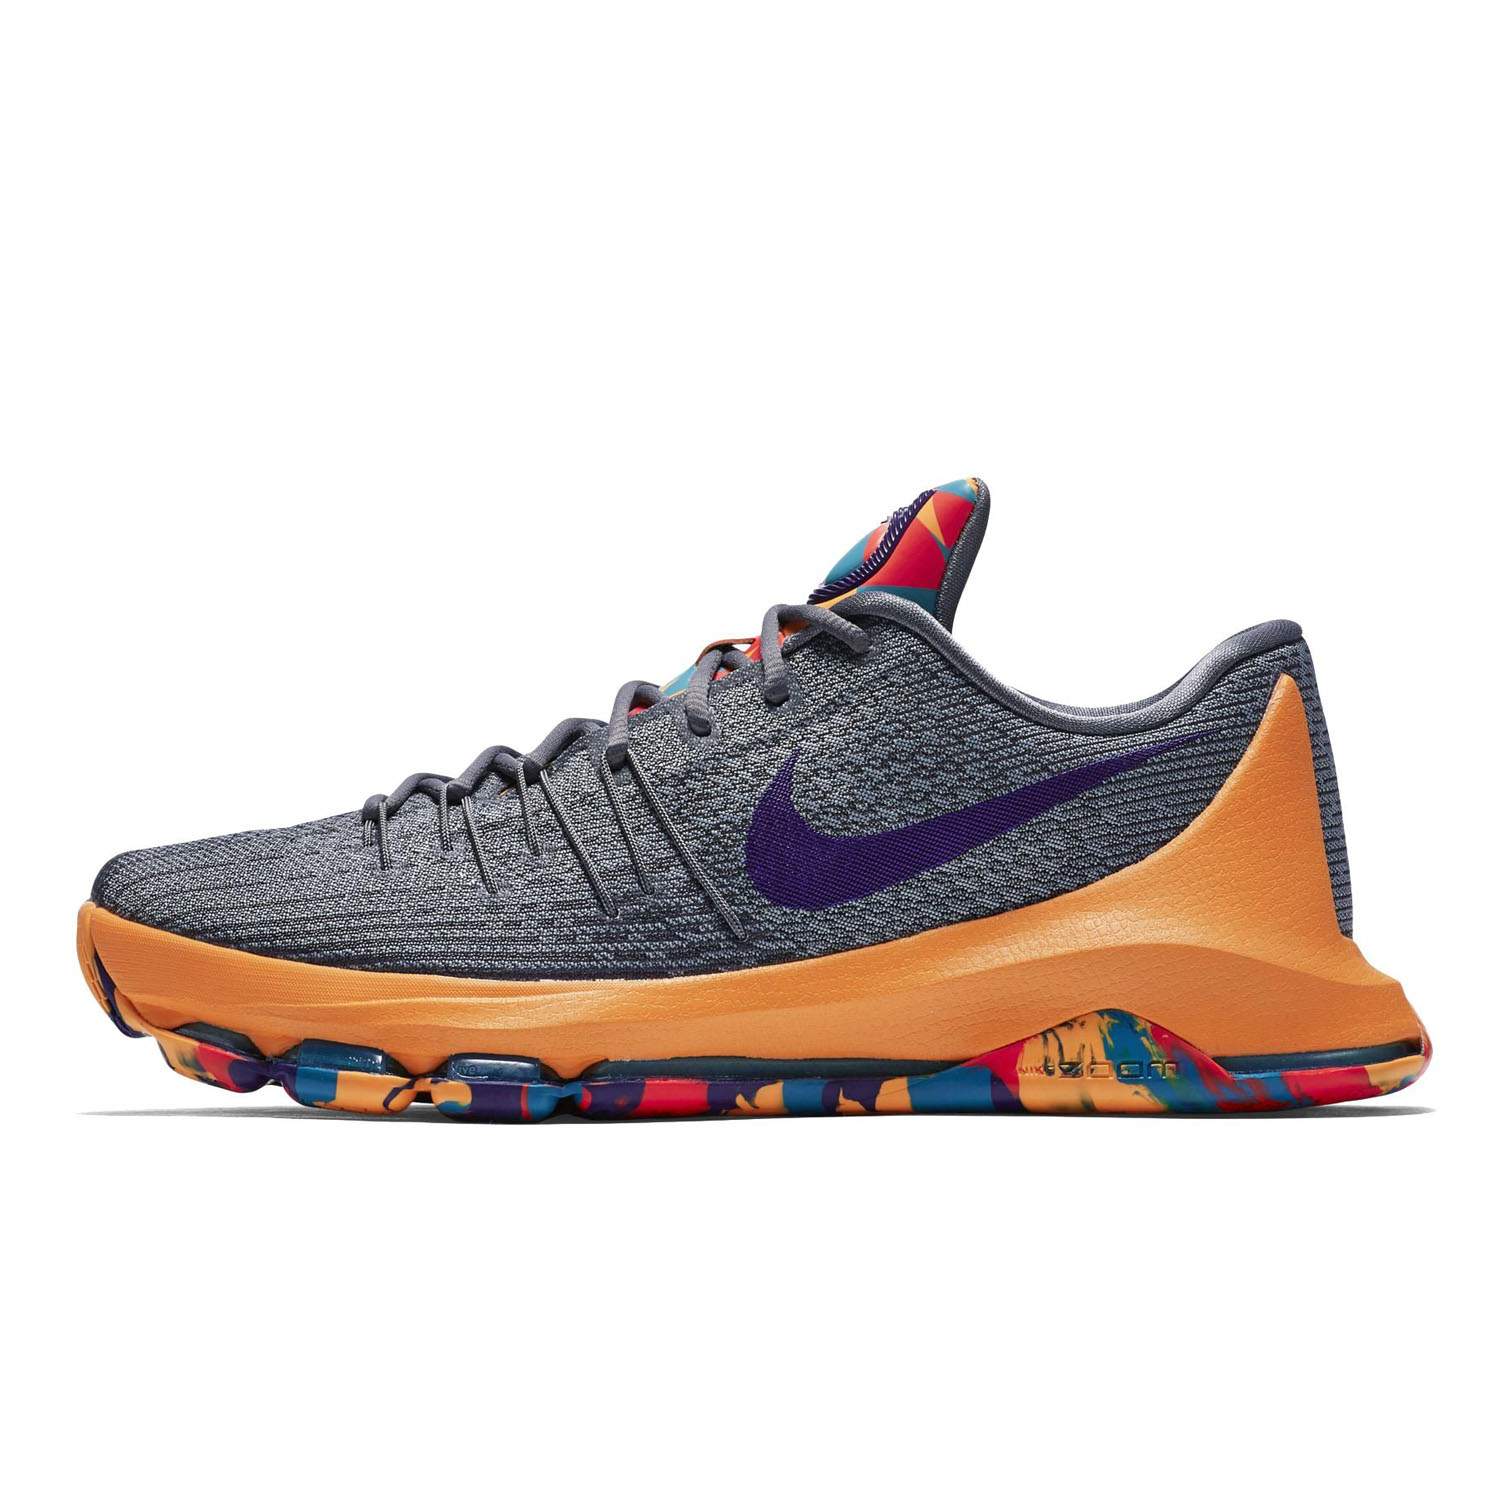 Buy Nike authentic nike mens 8 generations durant kd 8 ep actual basketball  shoes 800259-050 in Cheap Price on Alibaba.com